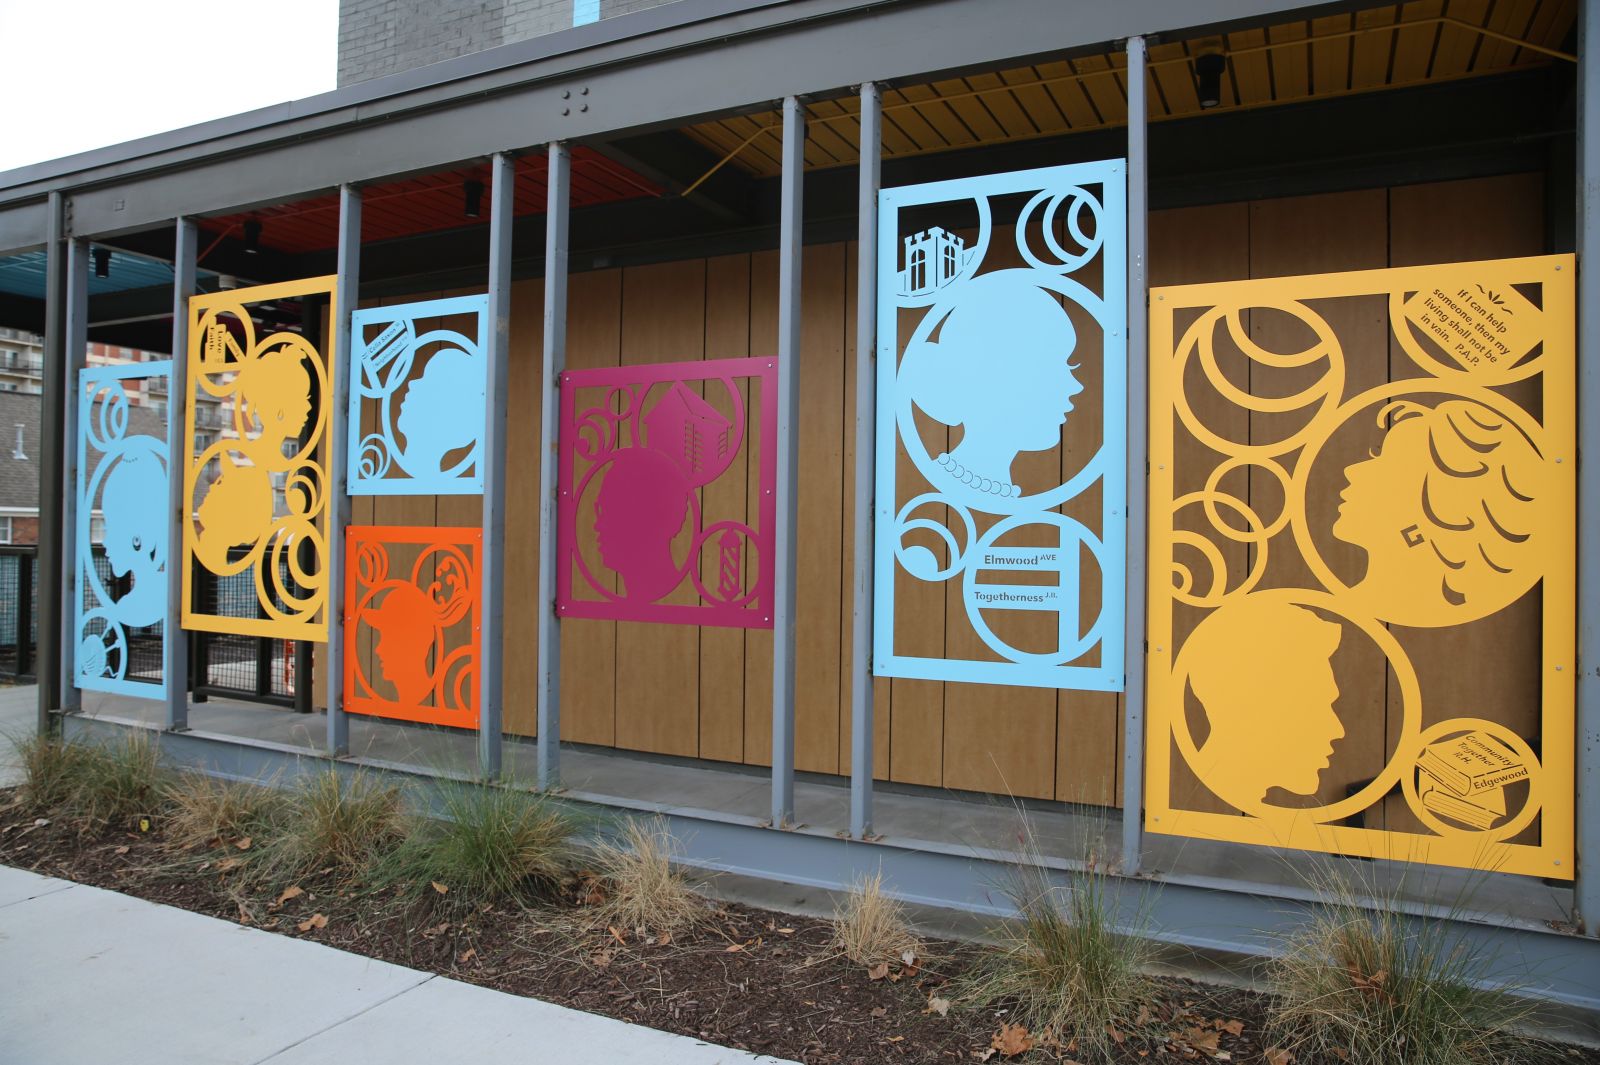 The new Richland County Library branch in the Edgewood community includes a piece of public art depicting community members. (Photo/Provided)